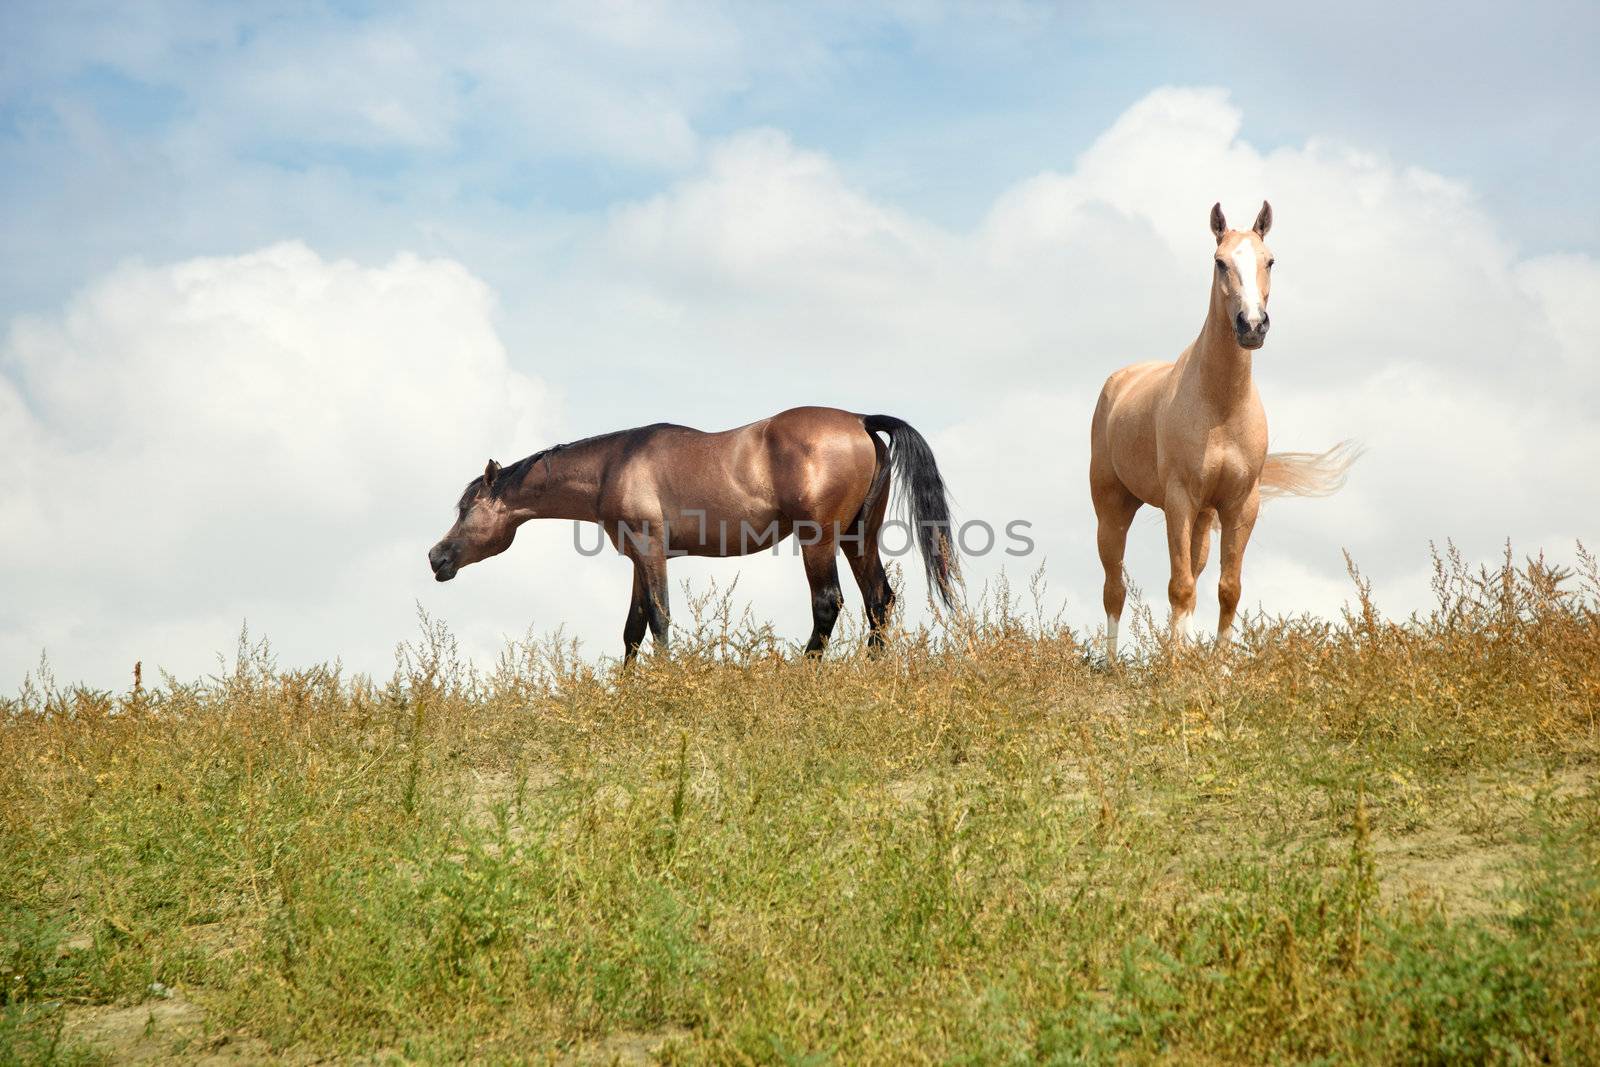 Two horses outdoors. Natural light and colors. Kazakhstan